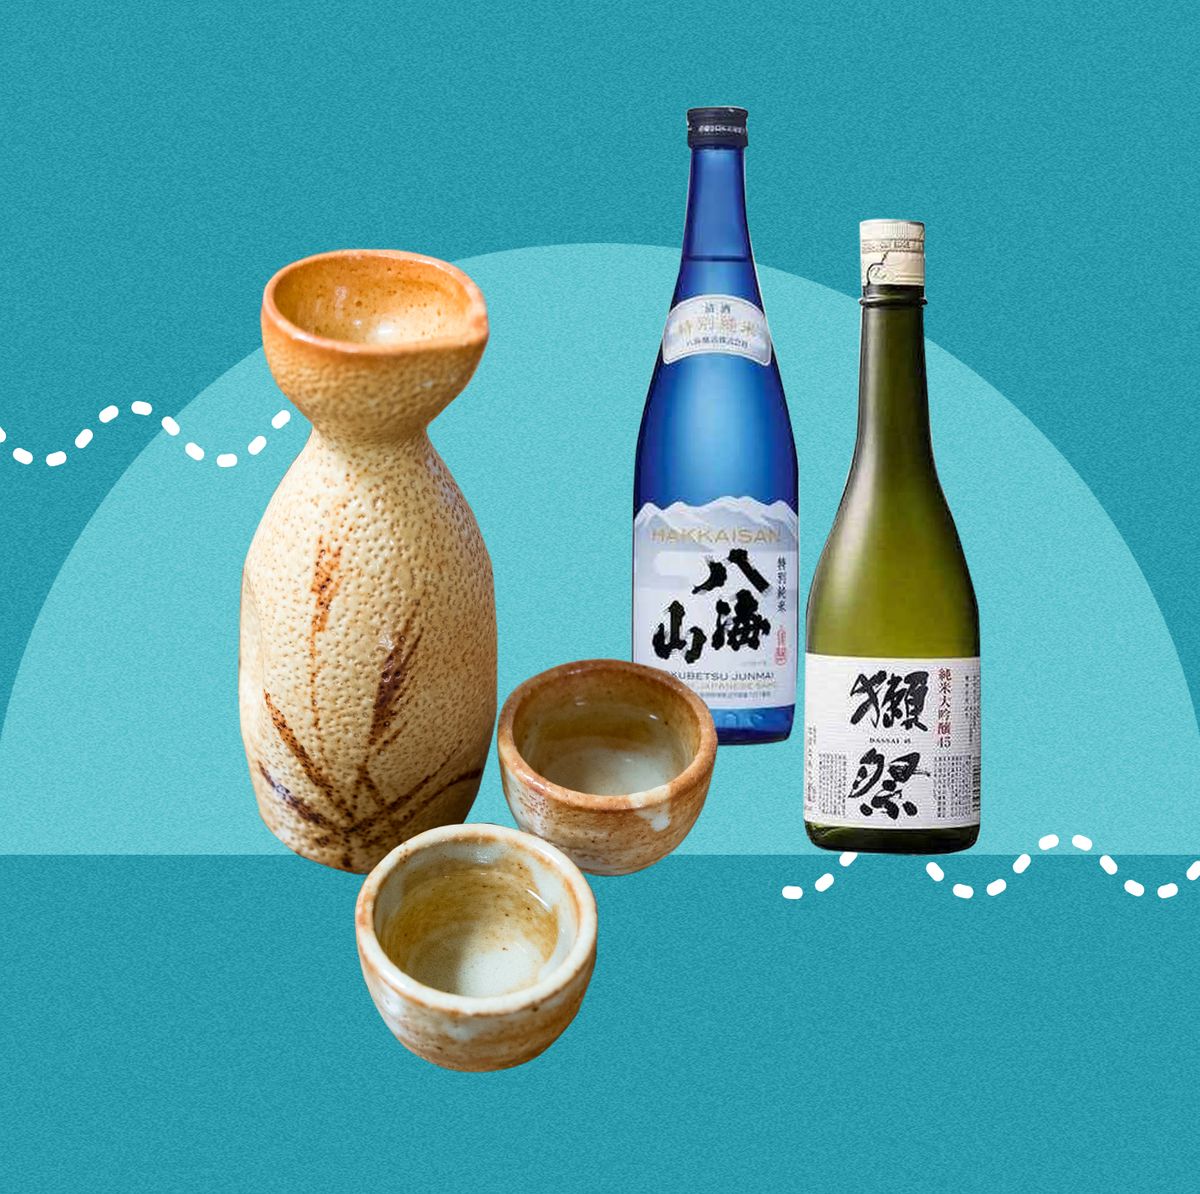 The Ultimate Guide to Sake Ware